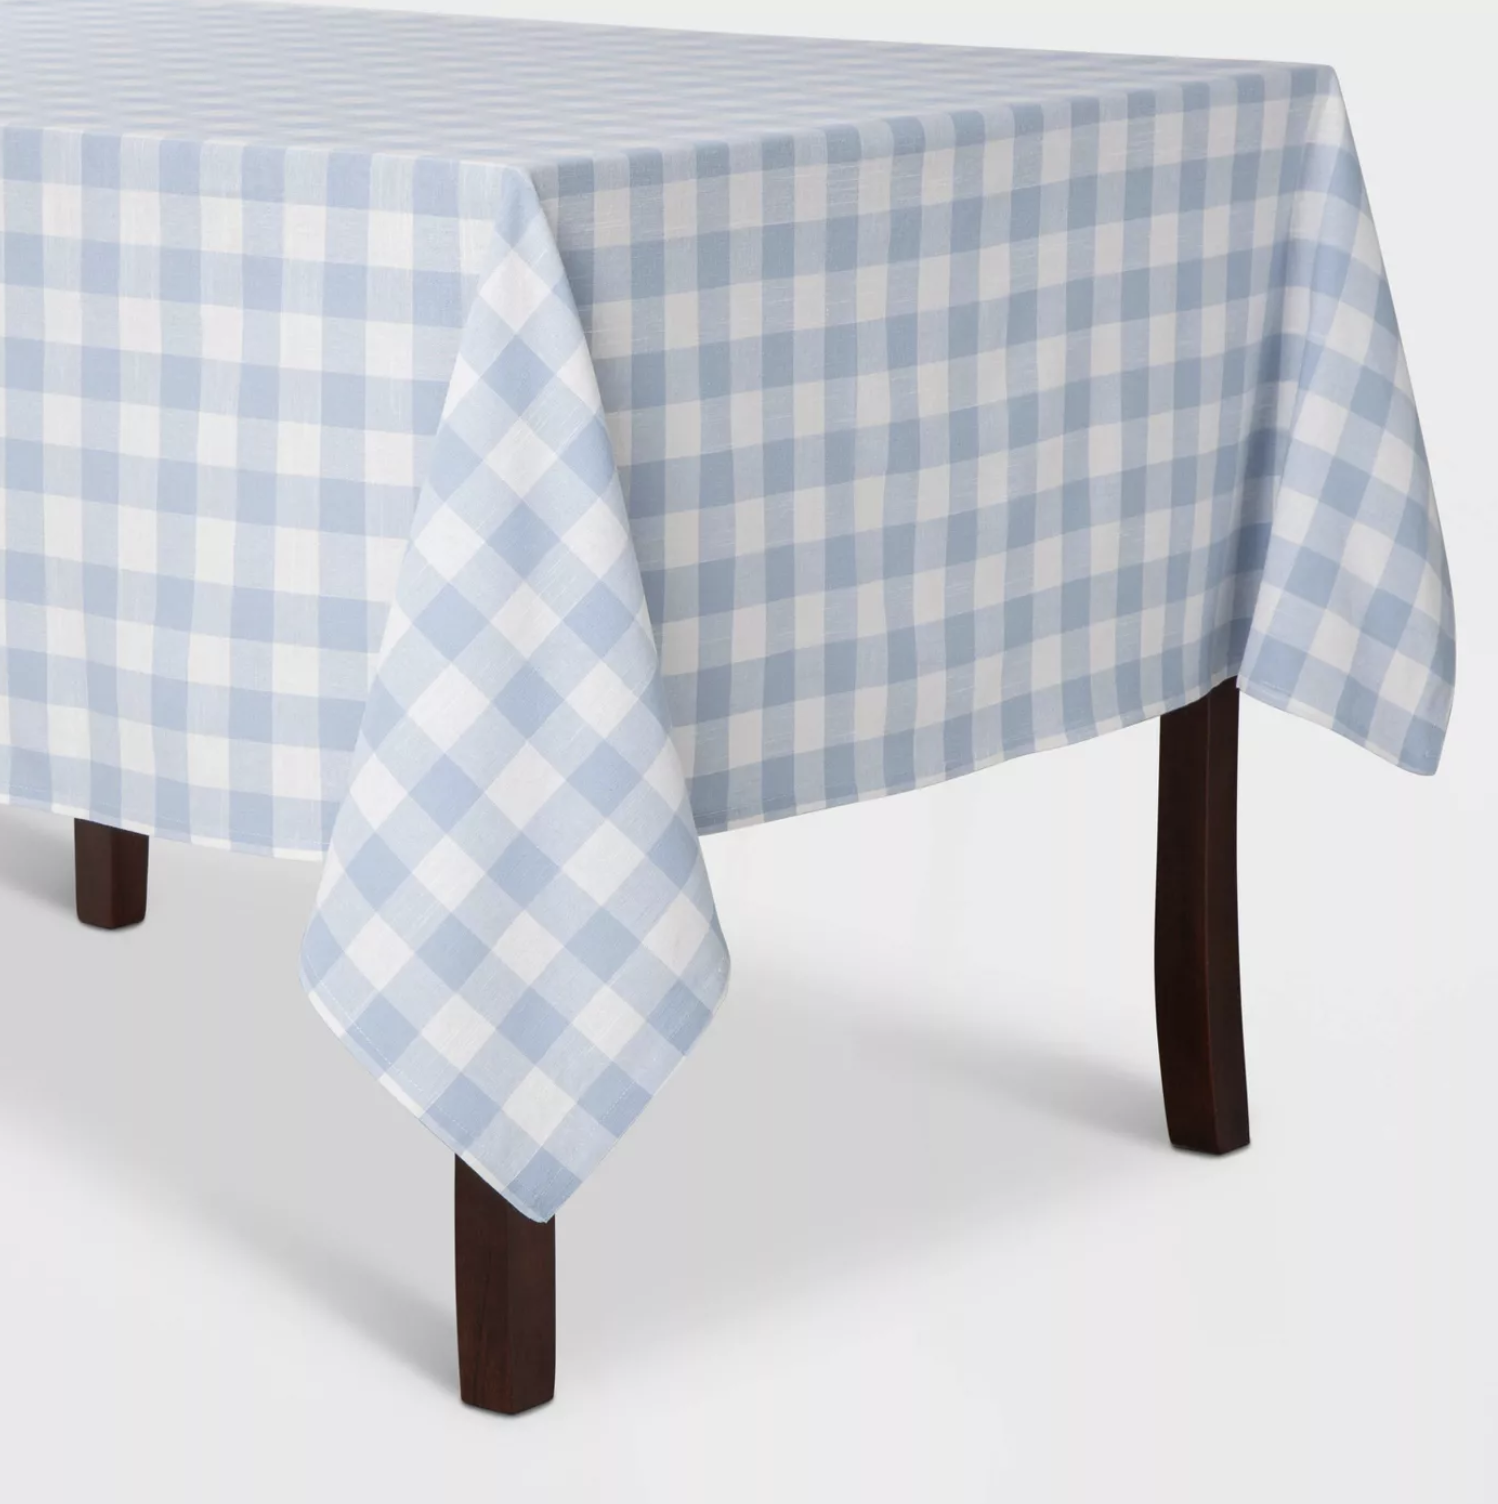 This gingham tablecloth is a great deal from Target.